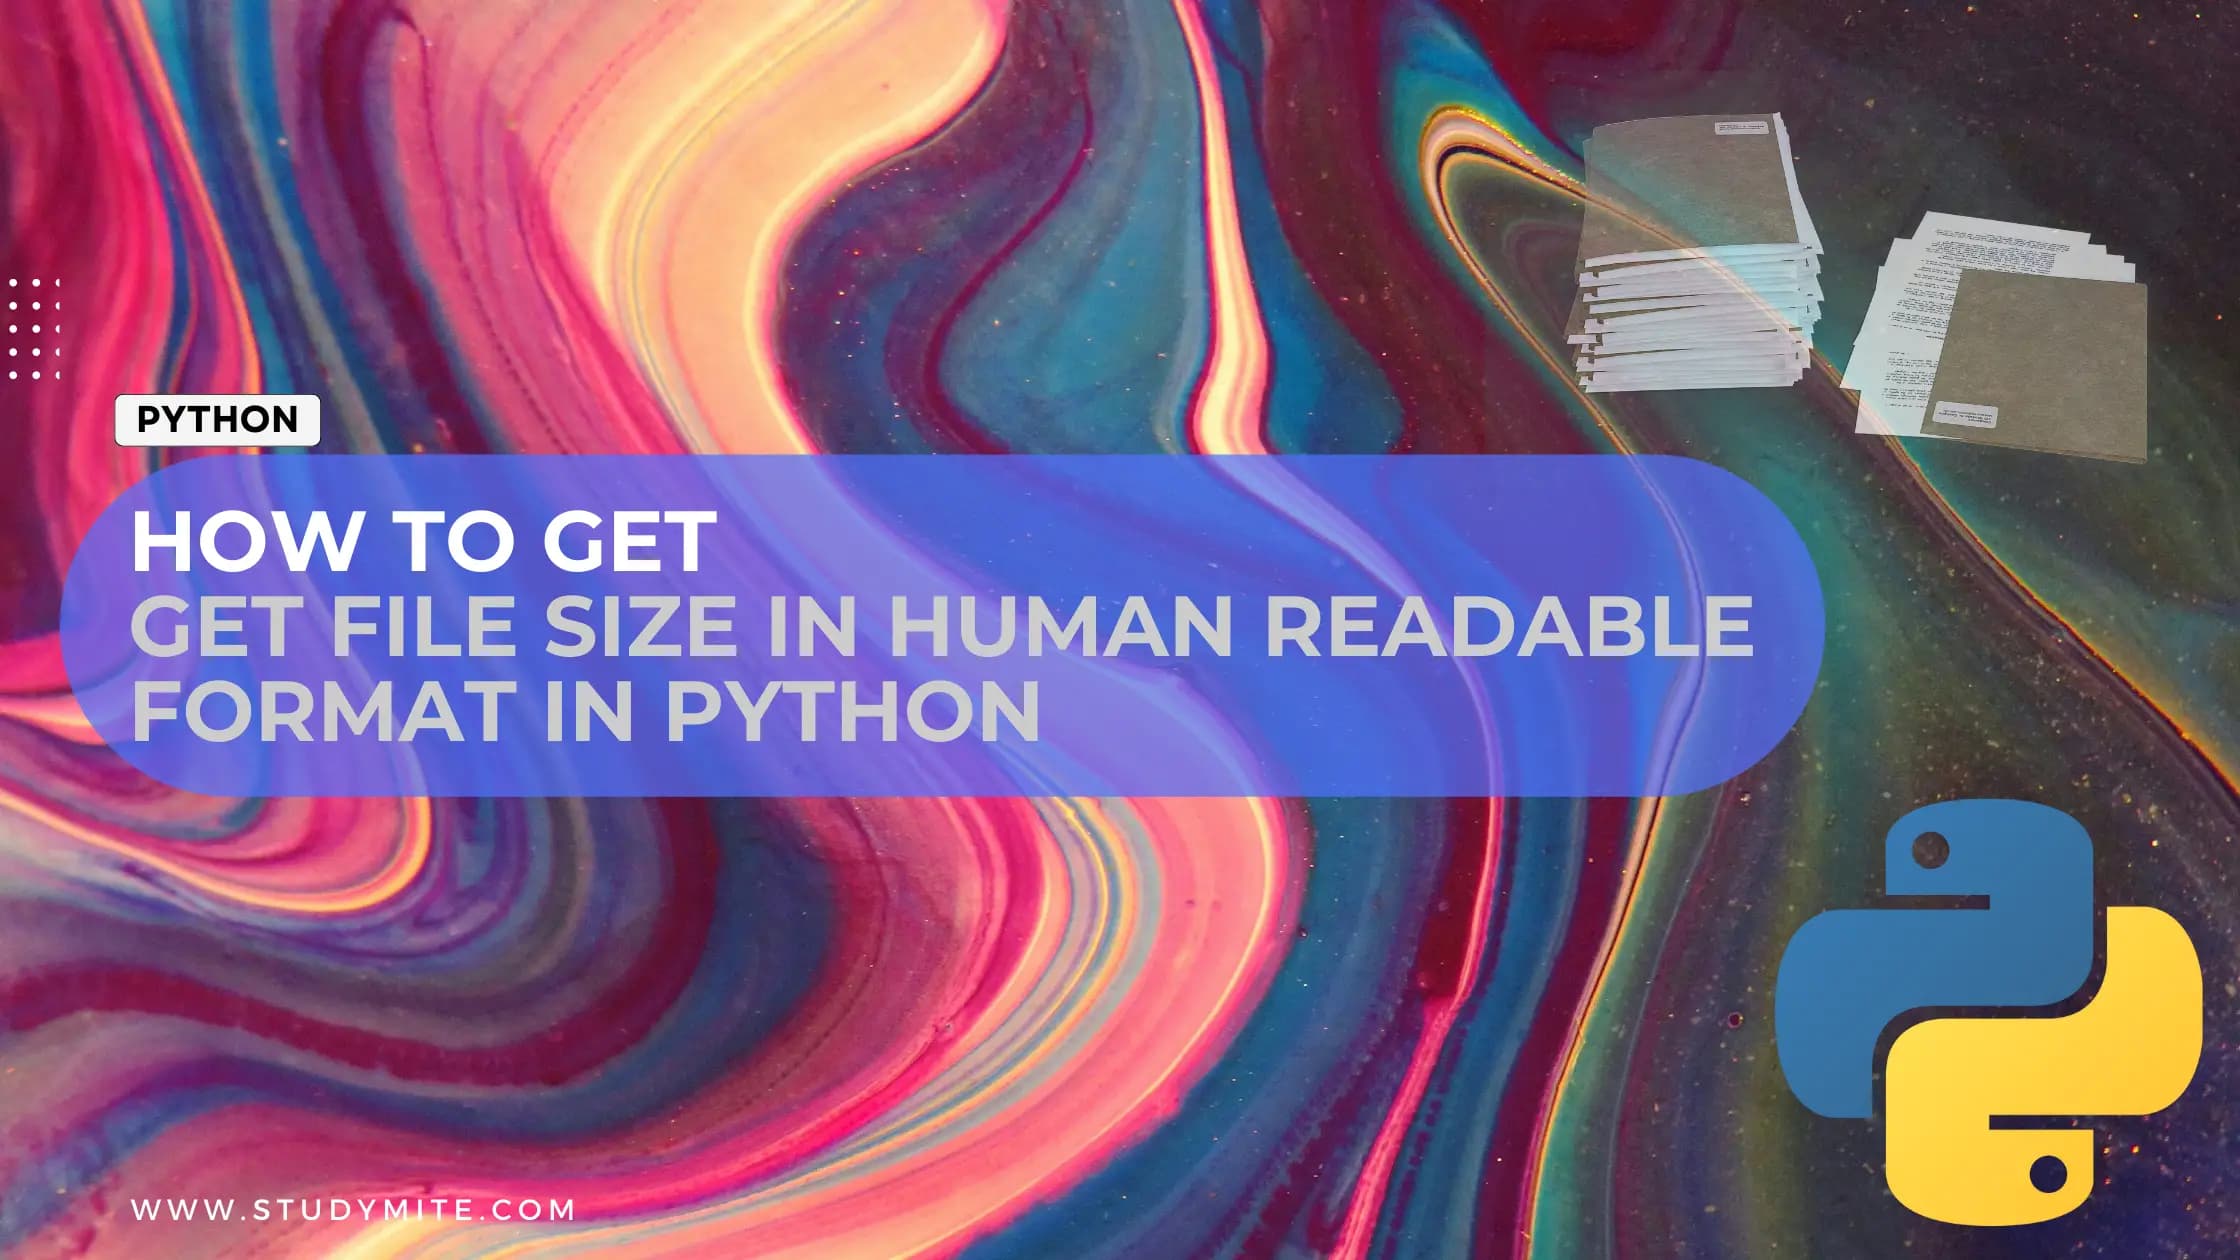 Get File Size in Human Readable Format in Python